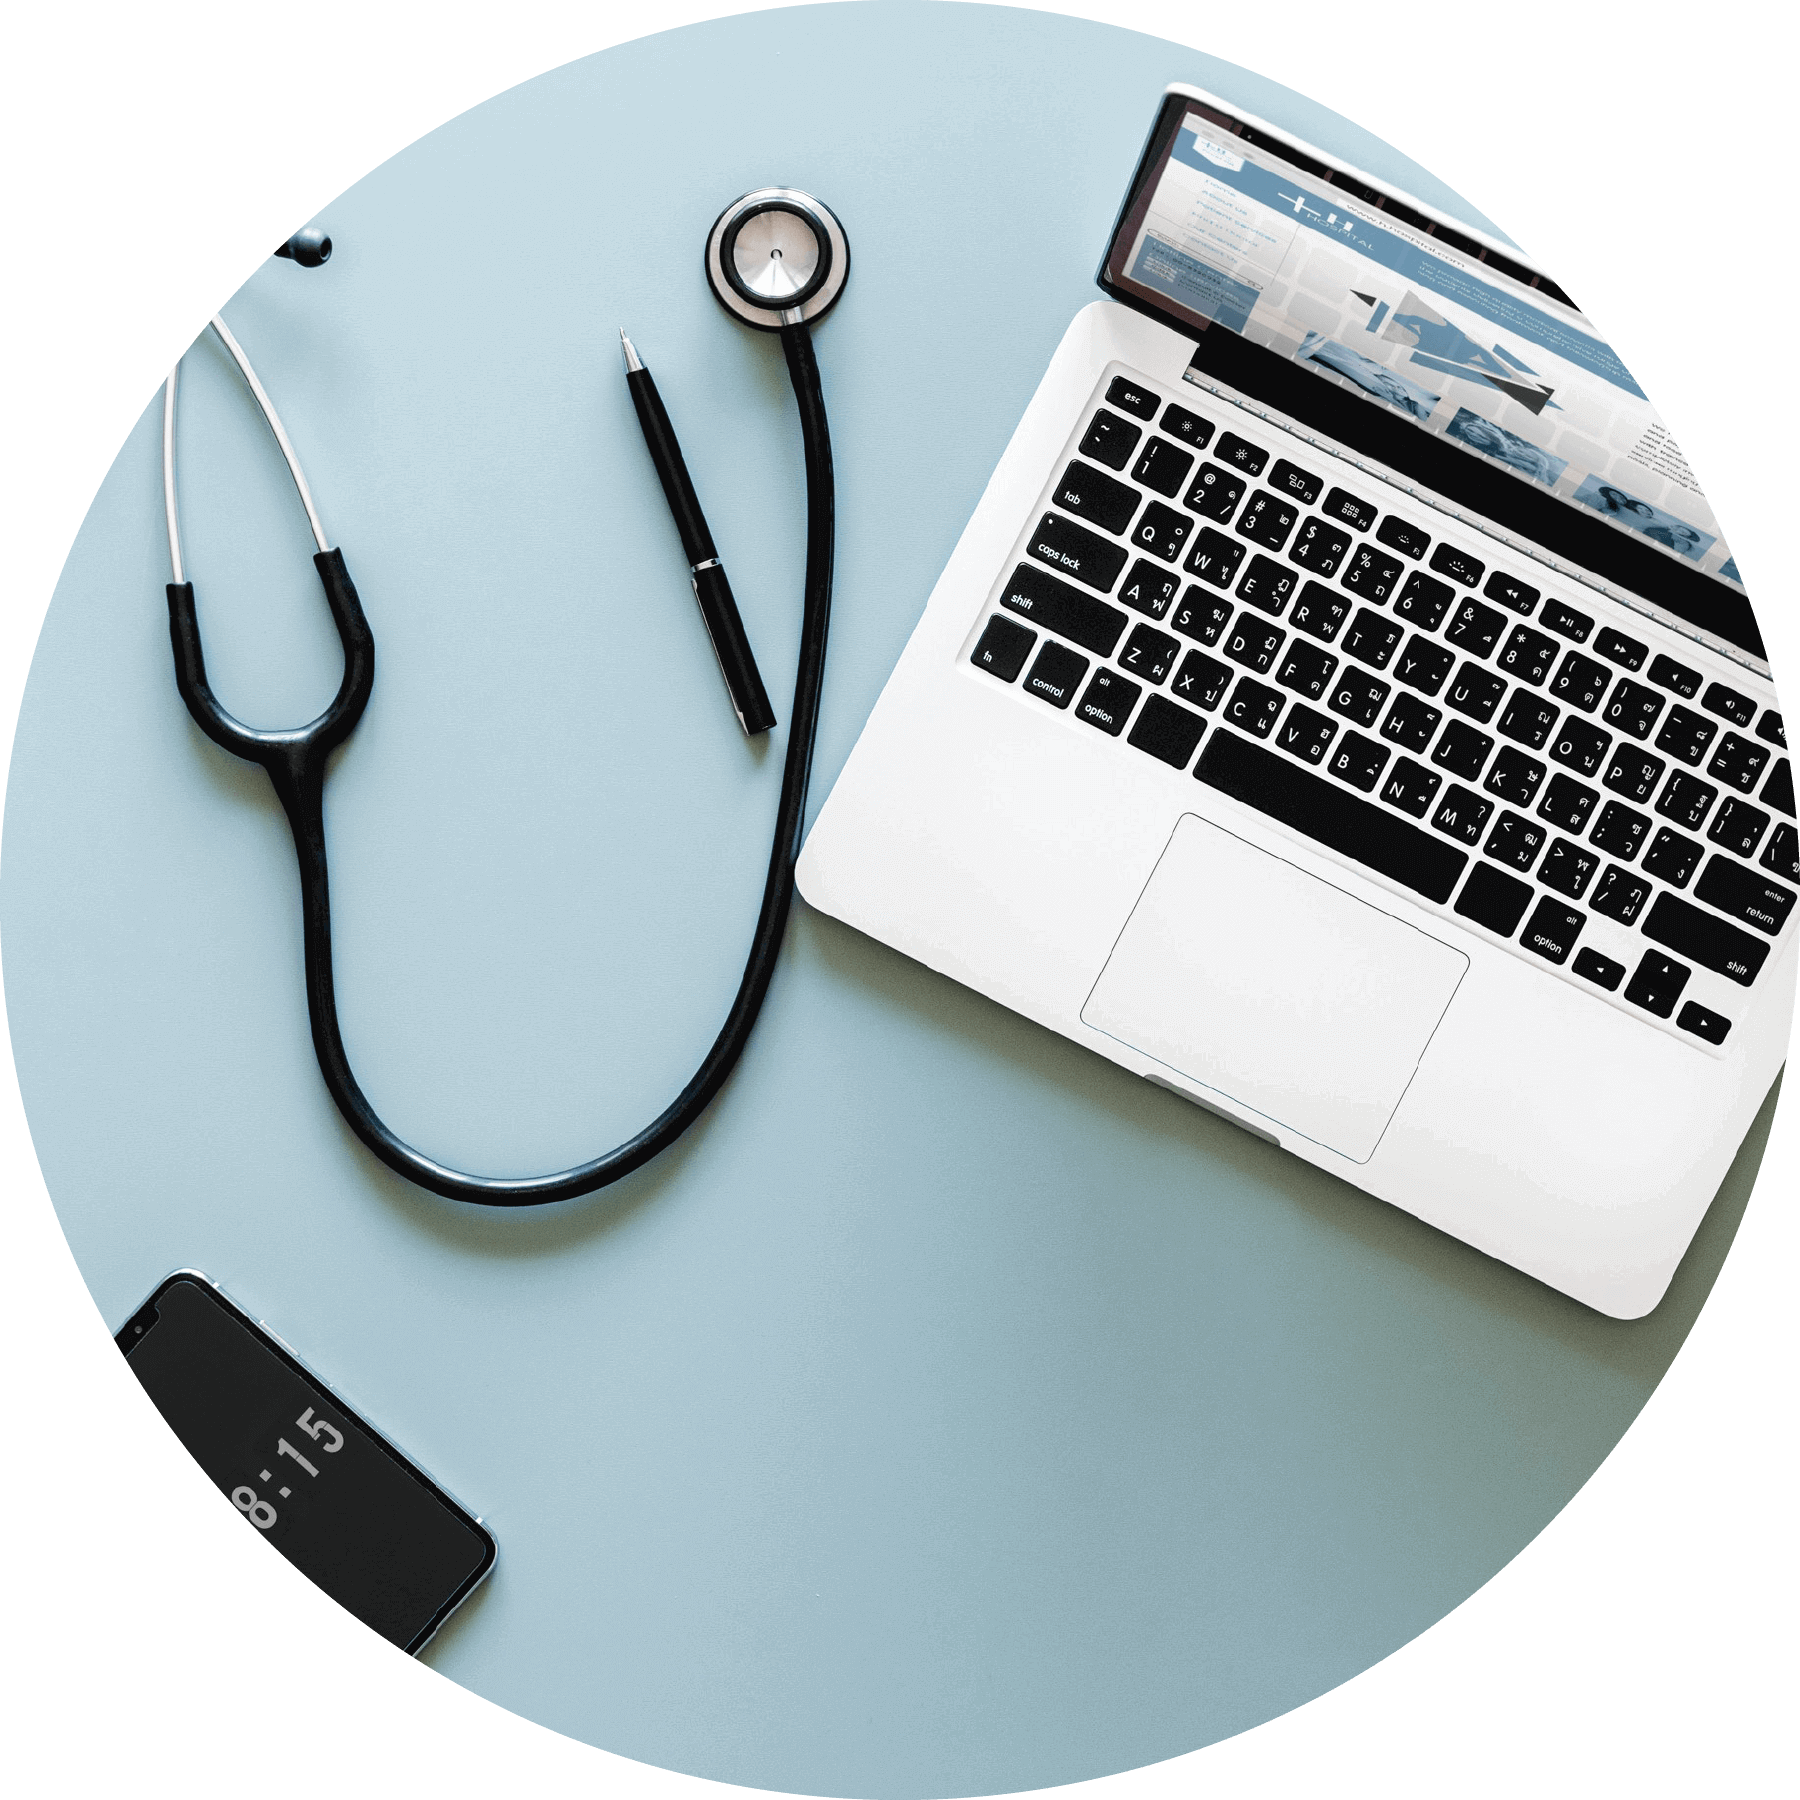 Stethoscope and laptop: Identity and Access Management